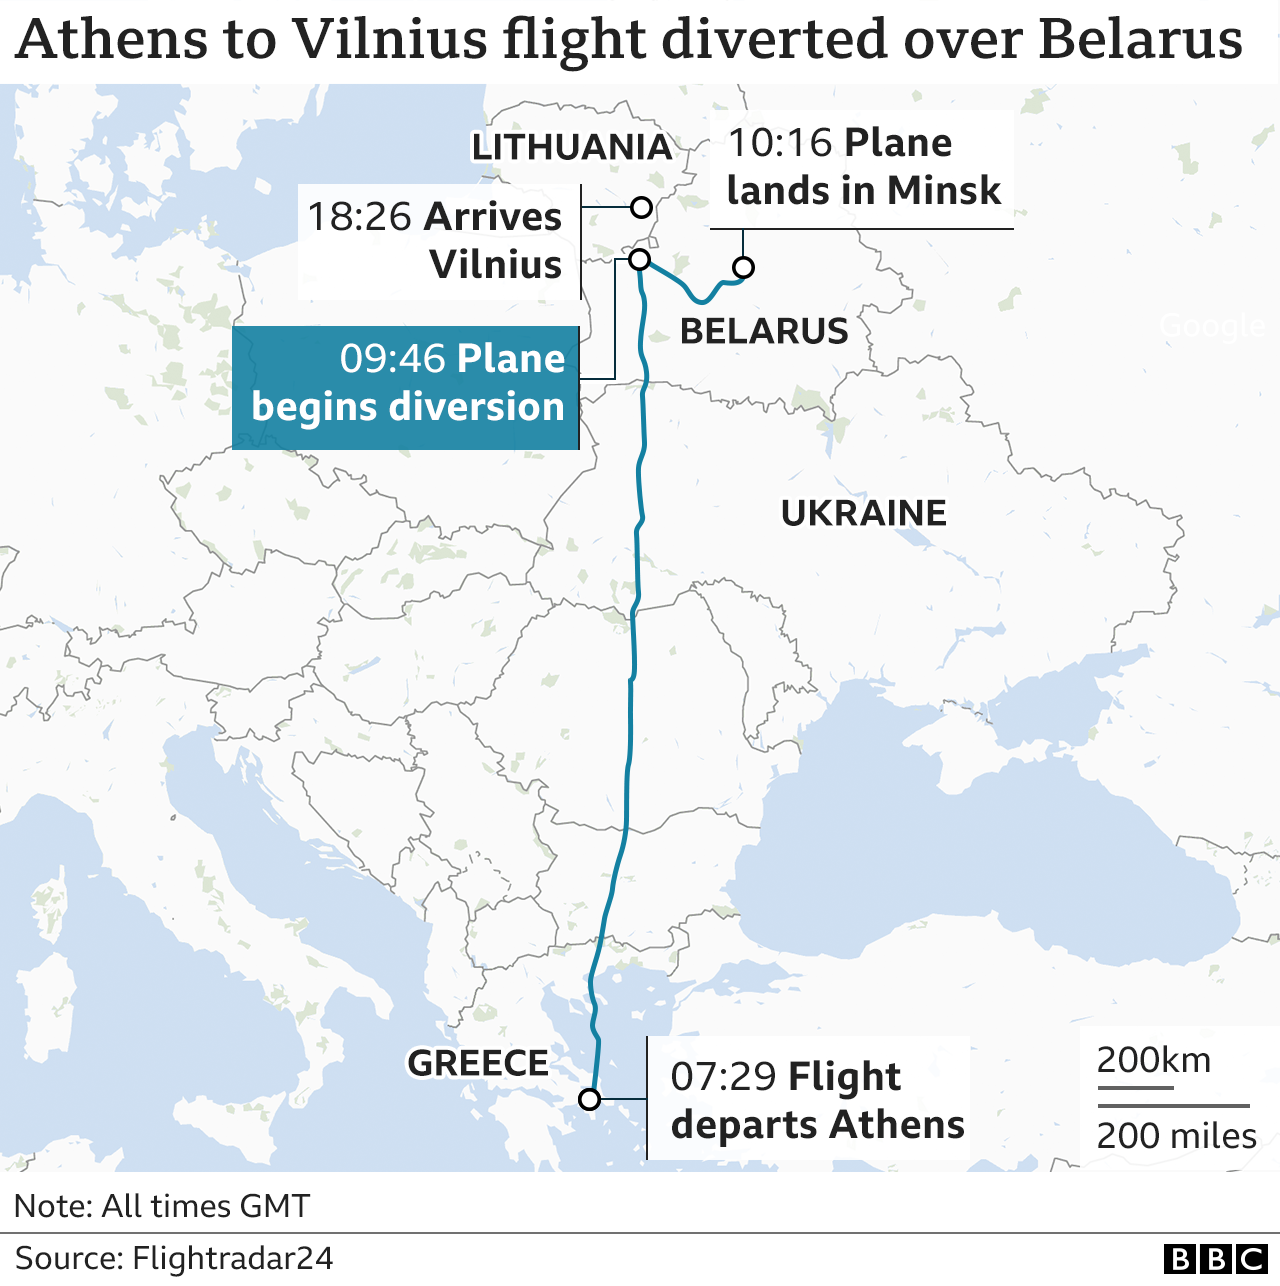 https://ichef.bbci.co.uk/news/976/cpsprodpb/65E2/production/_118628062_athens_flight_diverted_2x640-nc.png